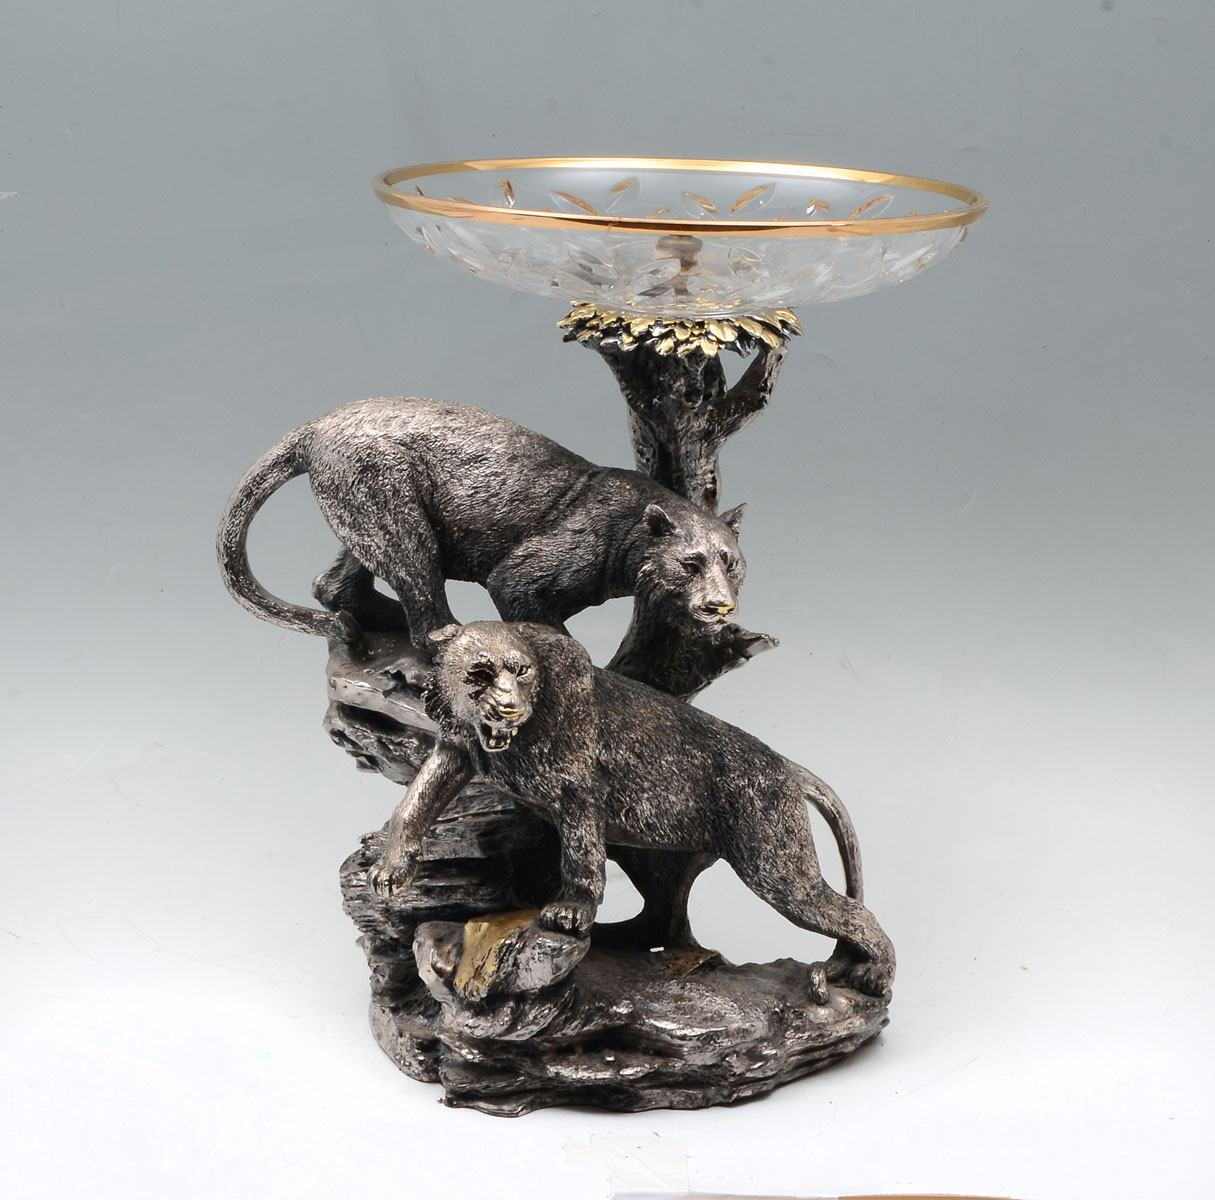 SILVER CLAD LION COMPOTE: Large